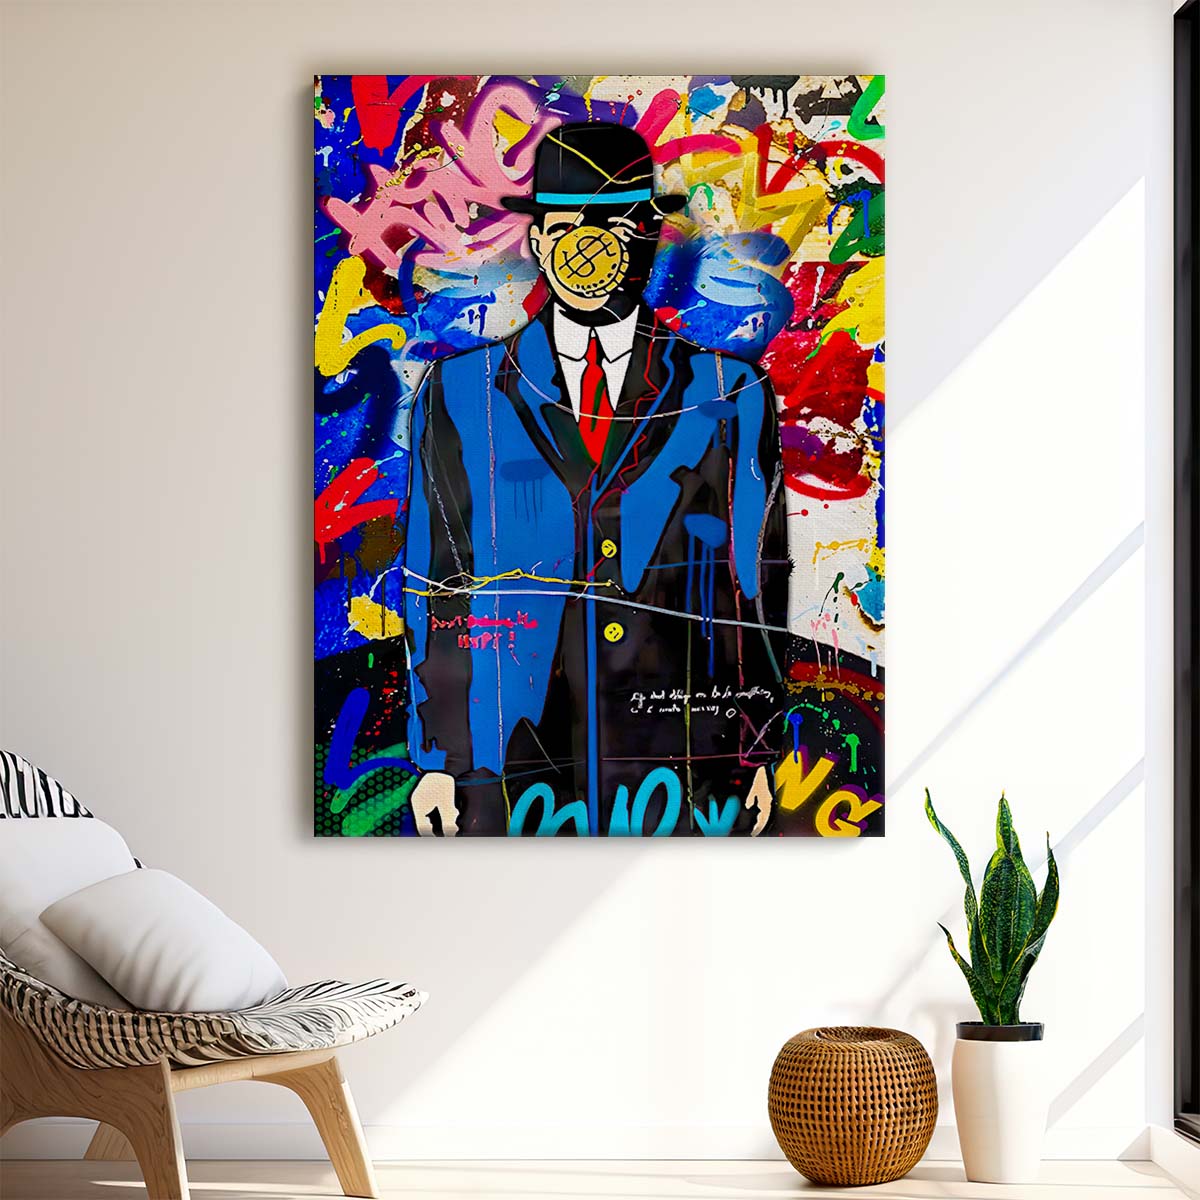 Rene Magritte Son of A Man Graffiti Wall Art by Luxuriance Designs. Made in USA.